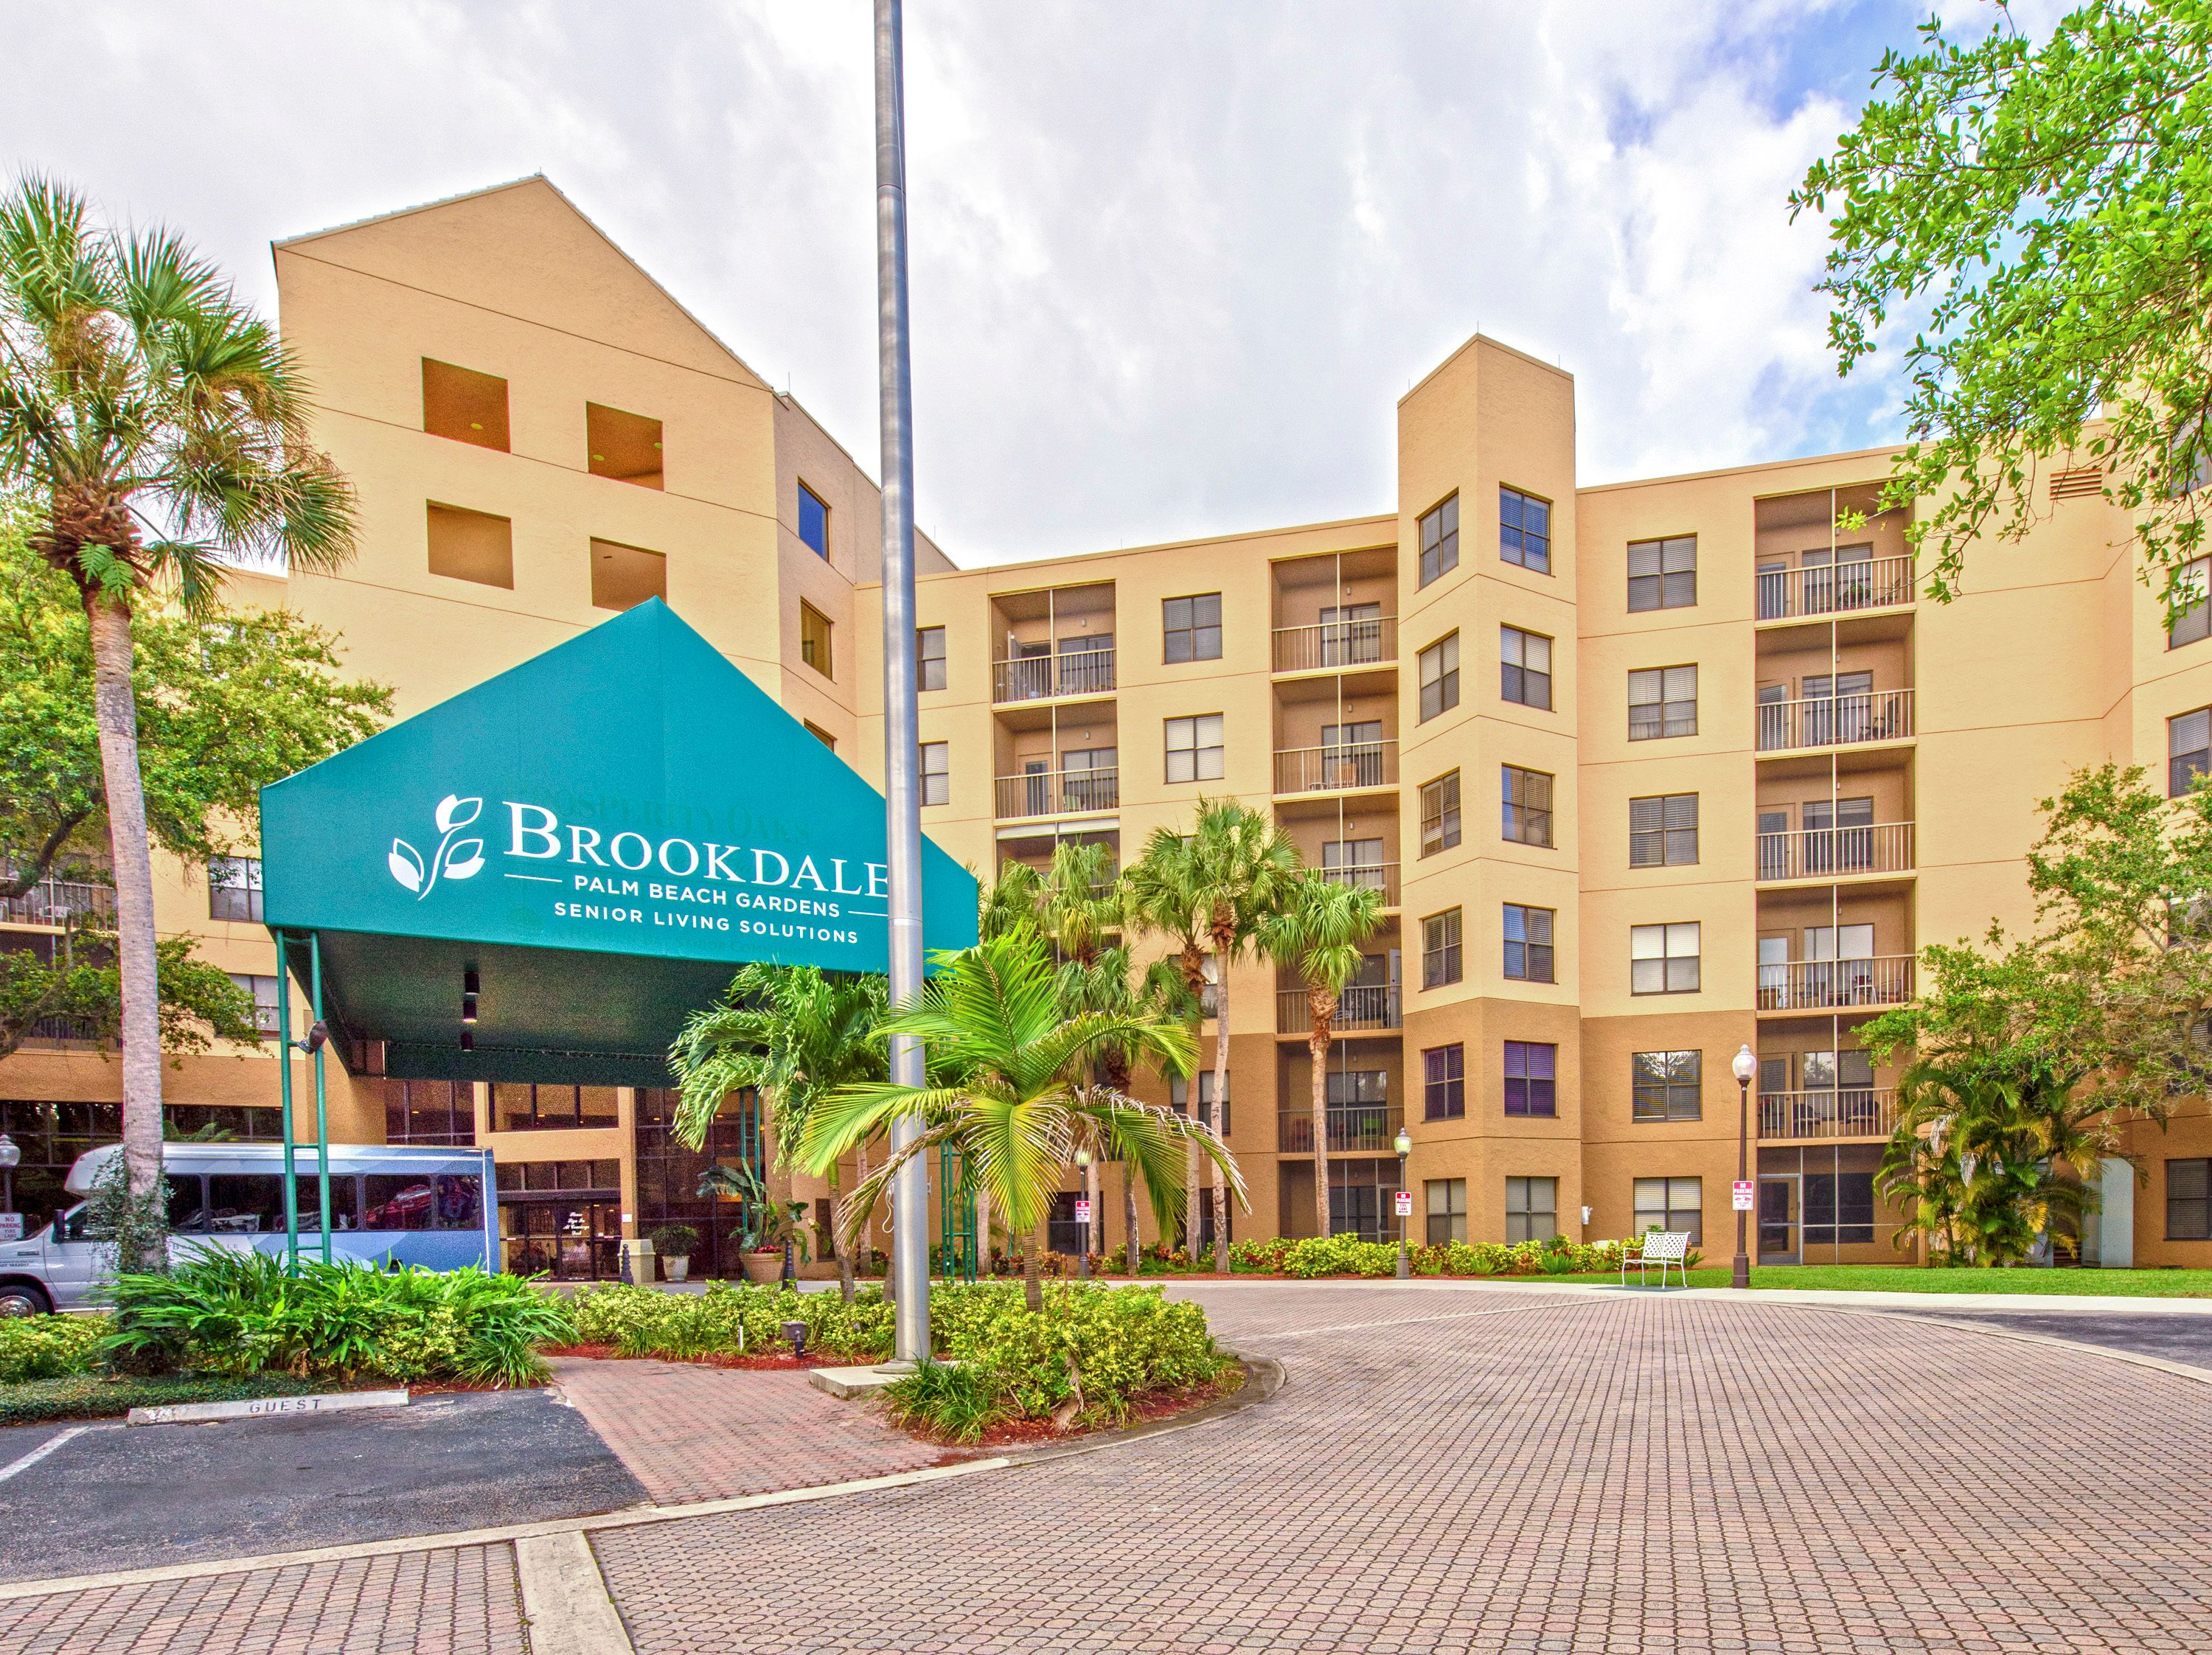 Senior living community, Brookdale Palm Beach Gardens, featuring urban architecture and amenities.